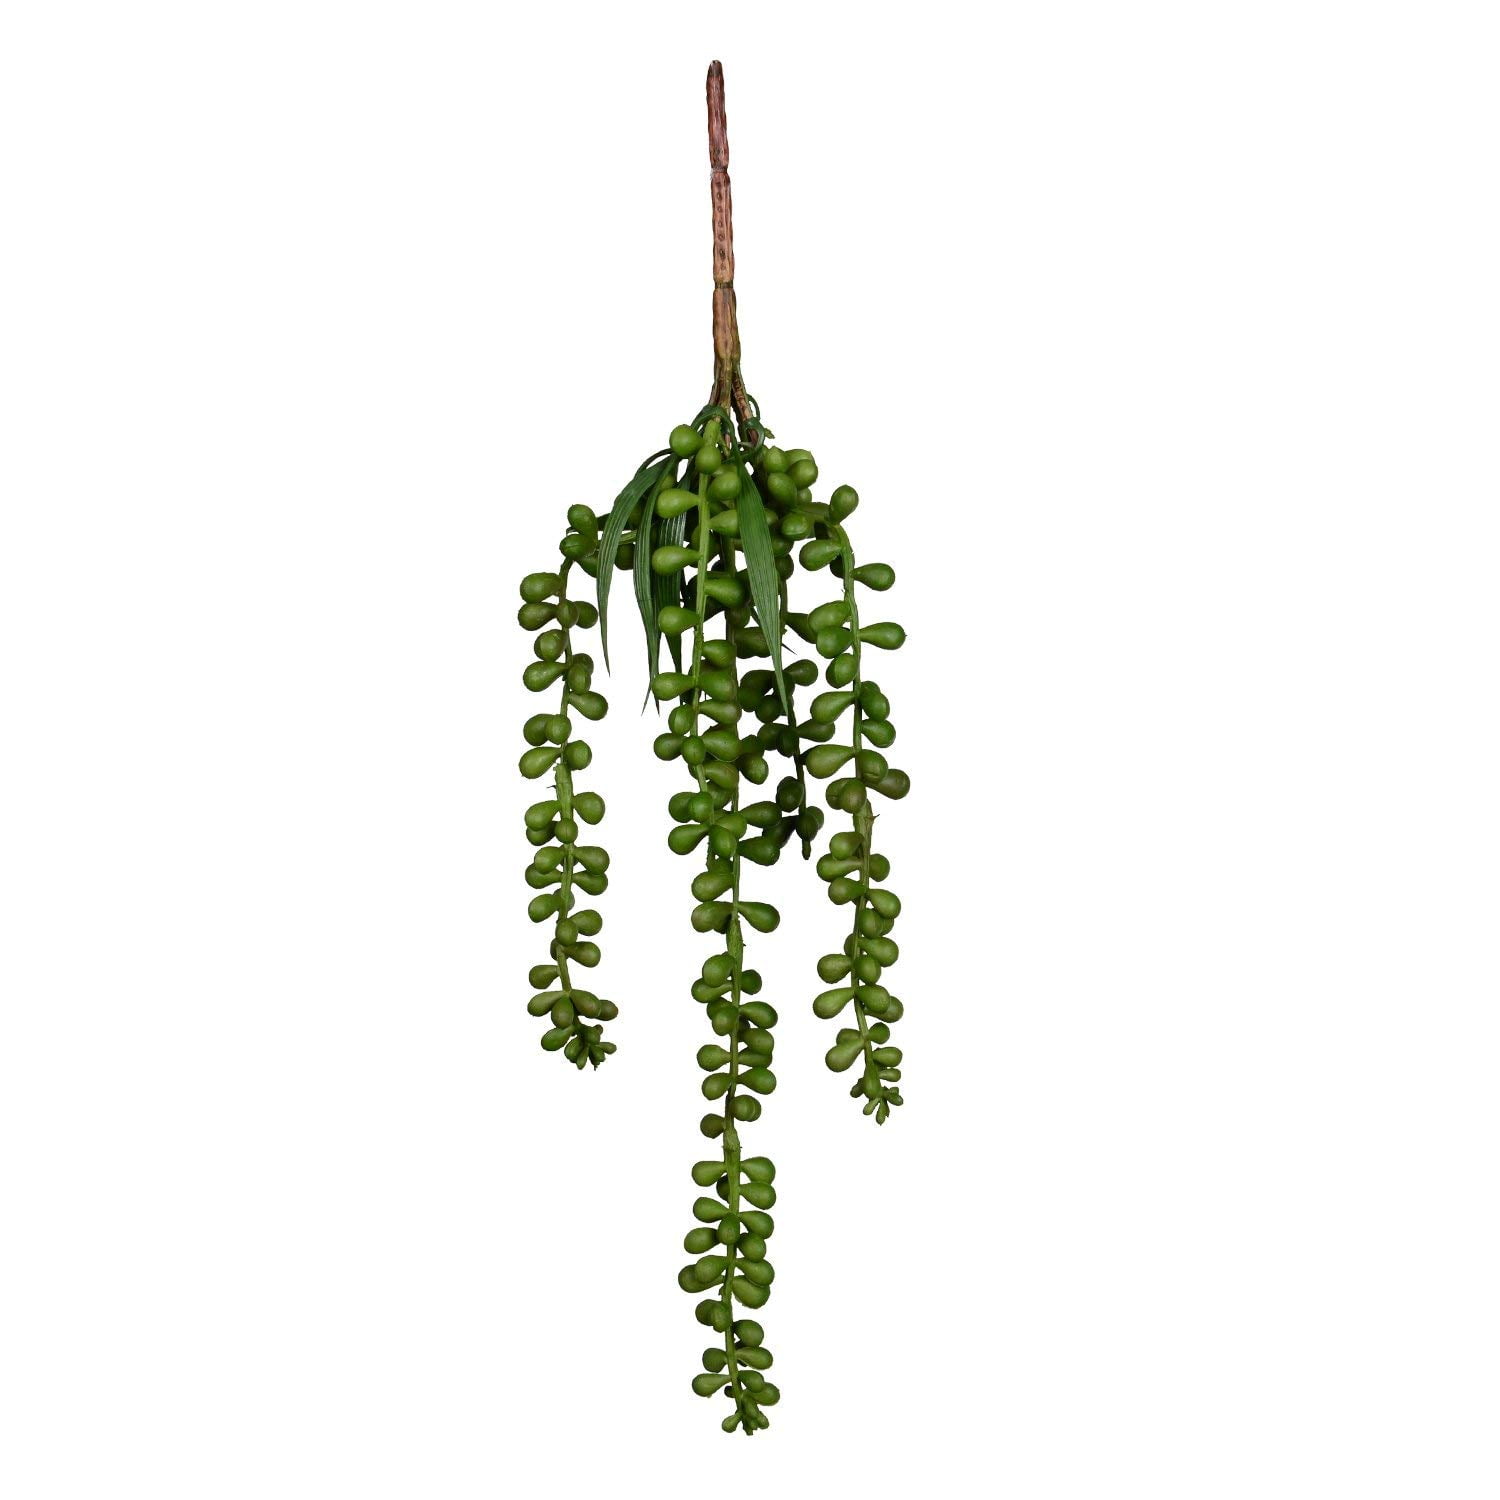 JUSTOYOU 2 Pack Artificial Succulents Plants String of Pearls Hanging Plants for Outdoor Wedding Garden Home Decor 2PCSQRL